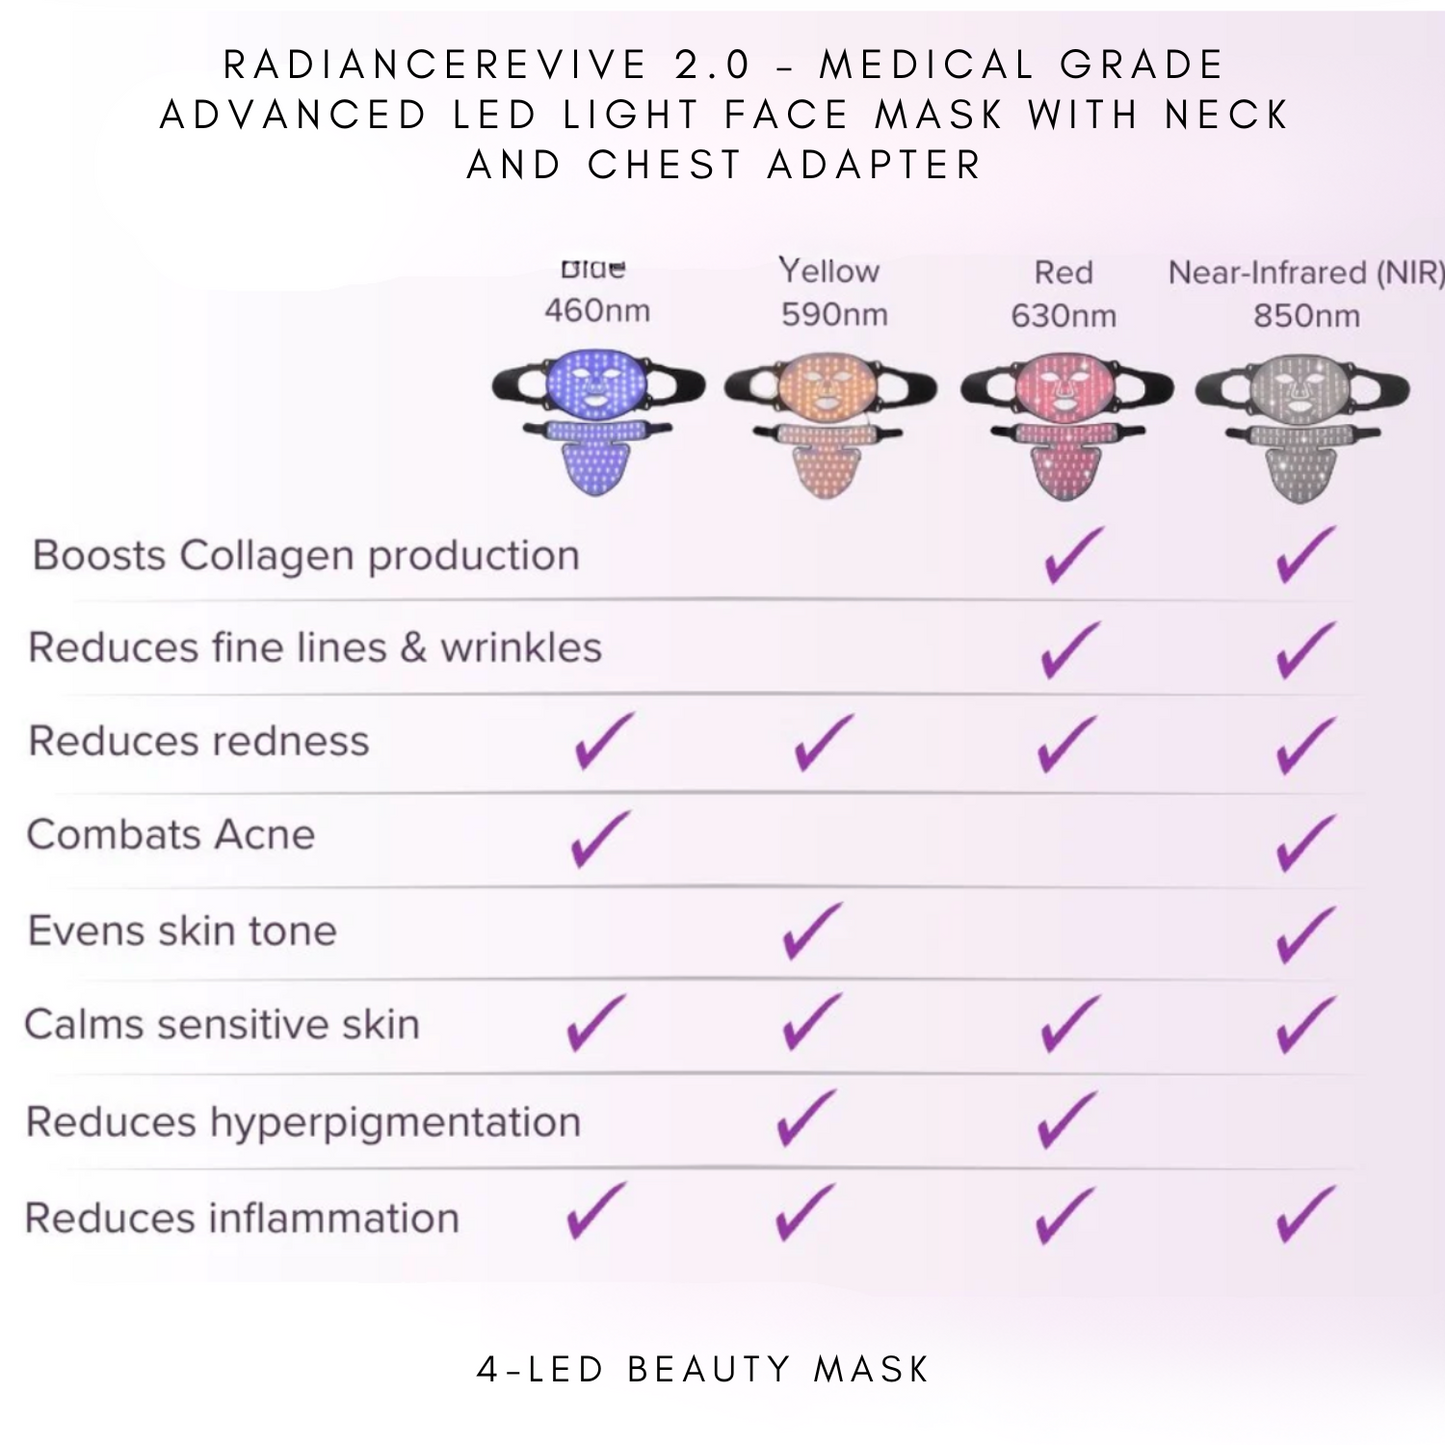 Radiance Revive 2.0 – Medical Grade Advanced LED Light Face Mask with Neck and Chest adapter